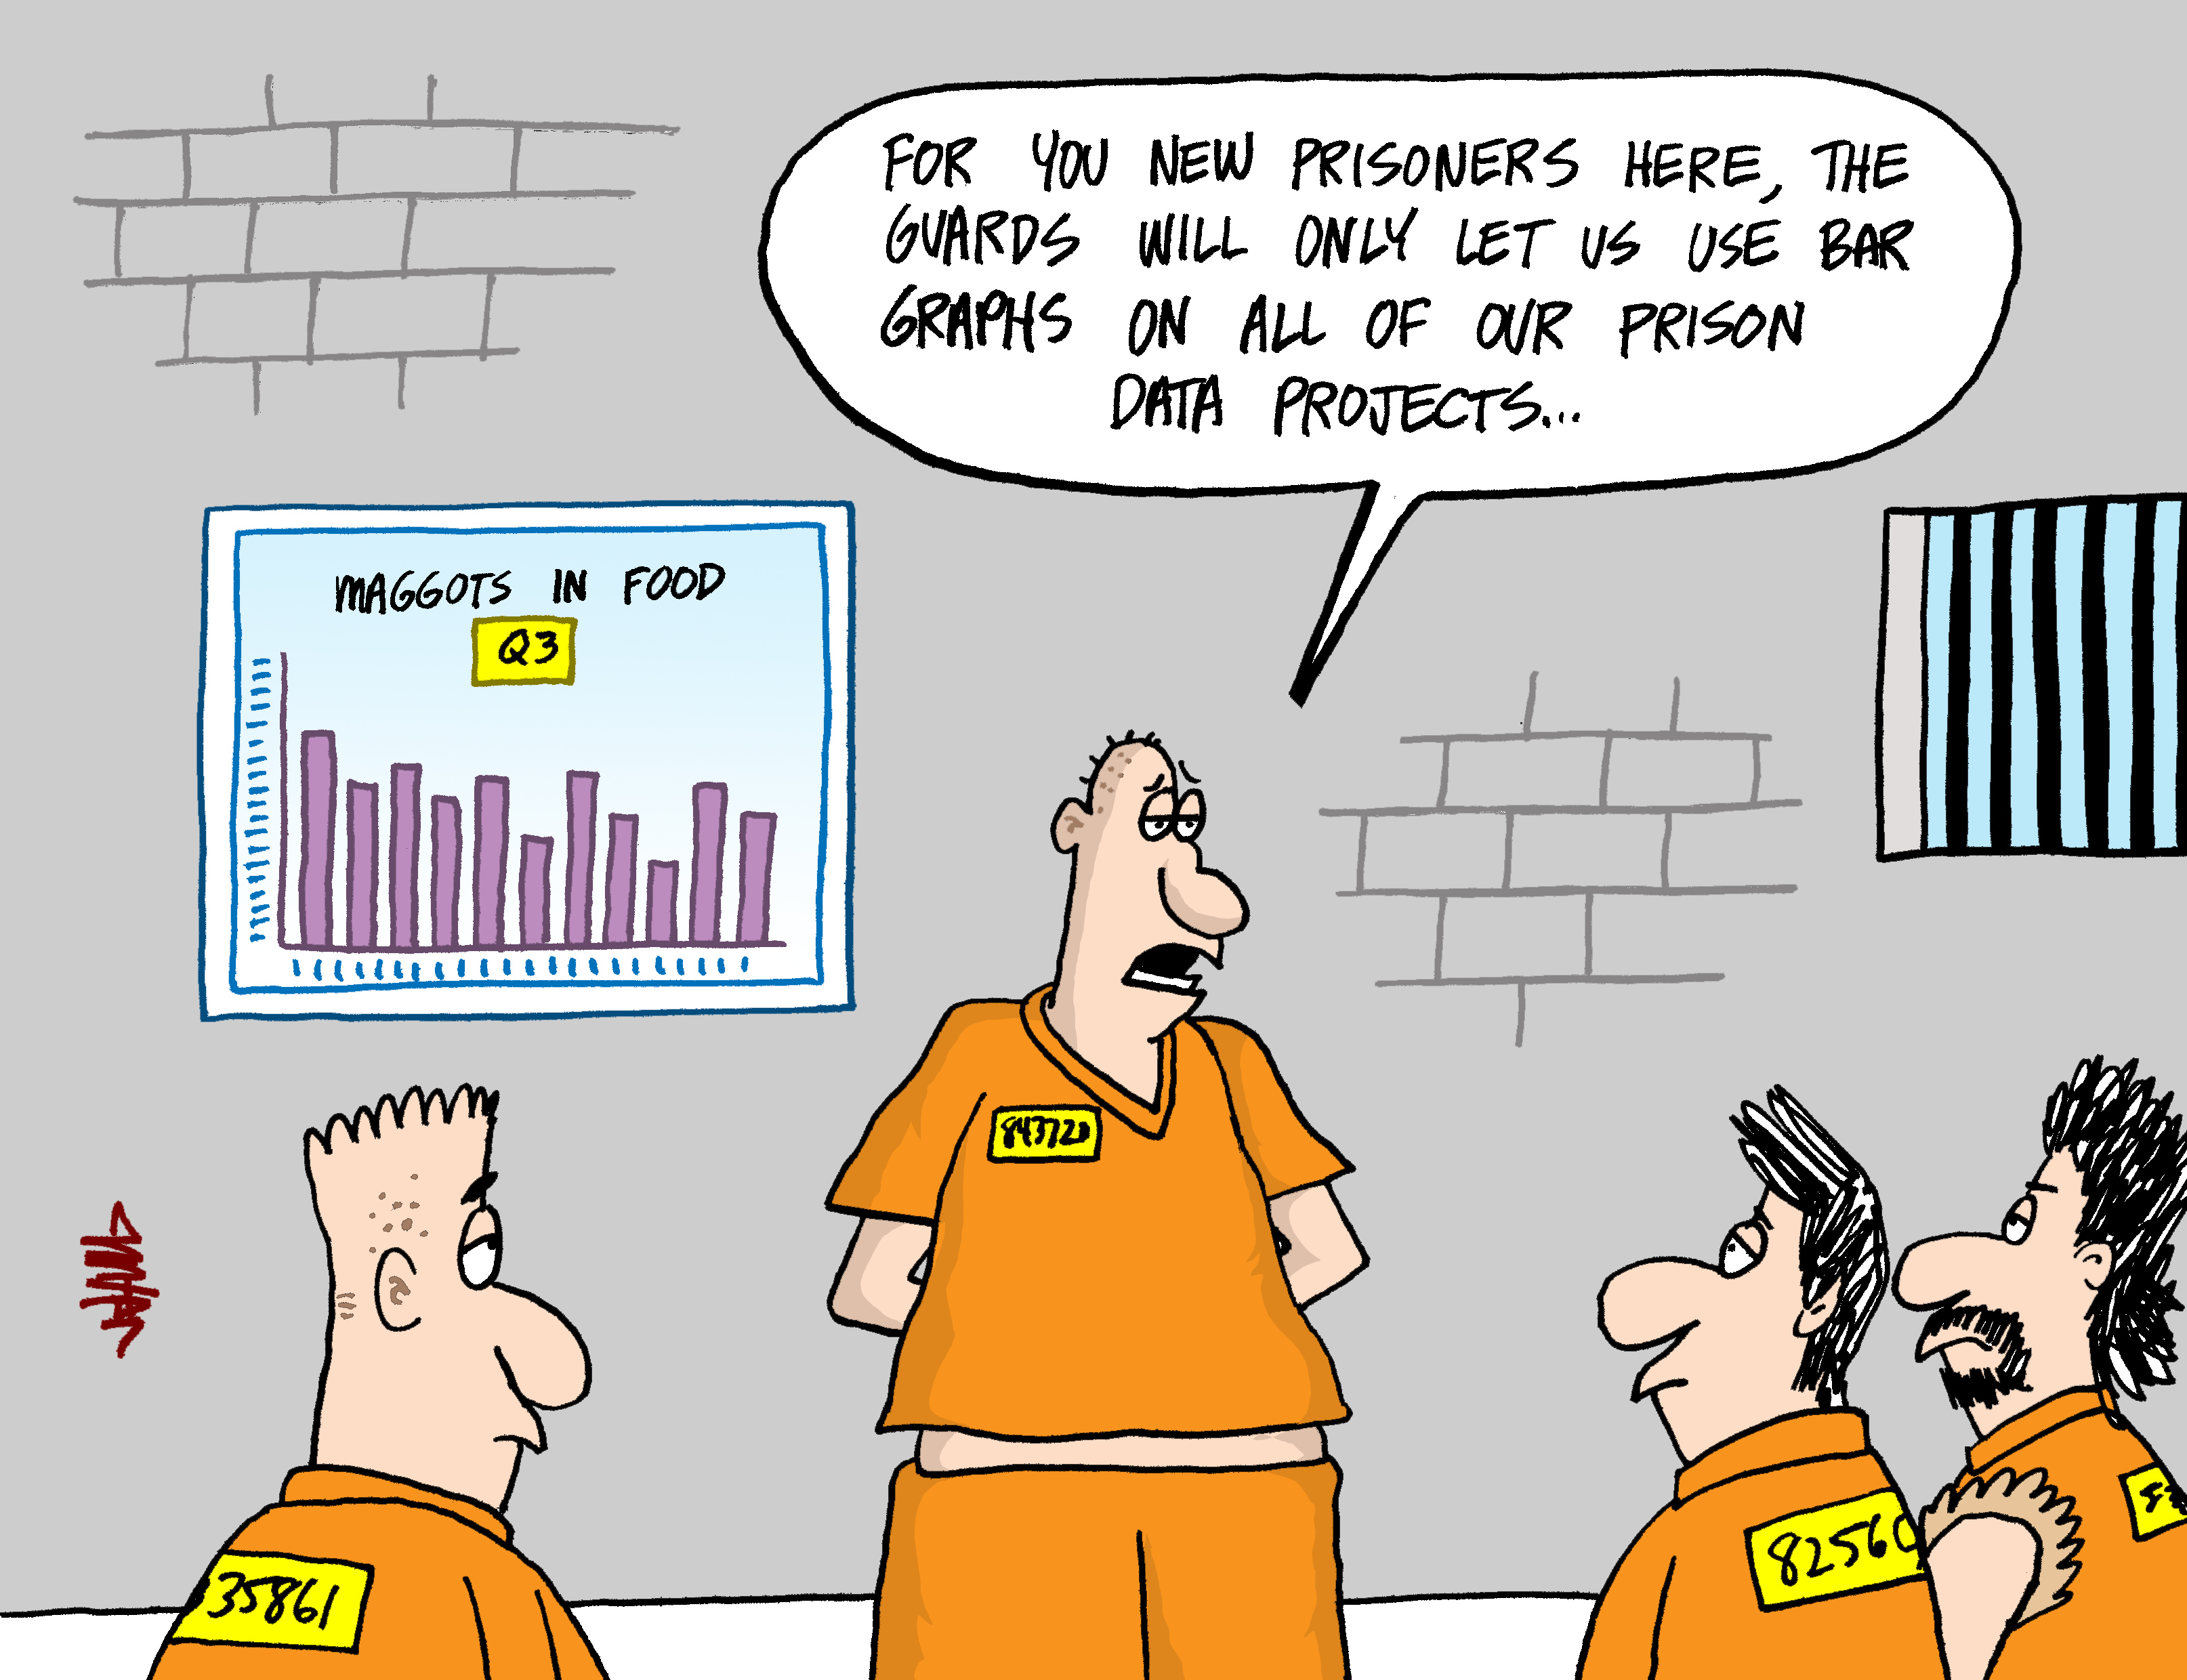 Caartoon showing prisoners talking and complaining that they are only allowed to use bar graphs in their data projects